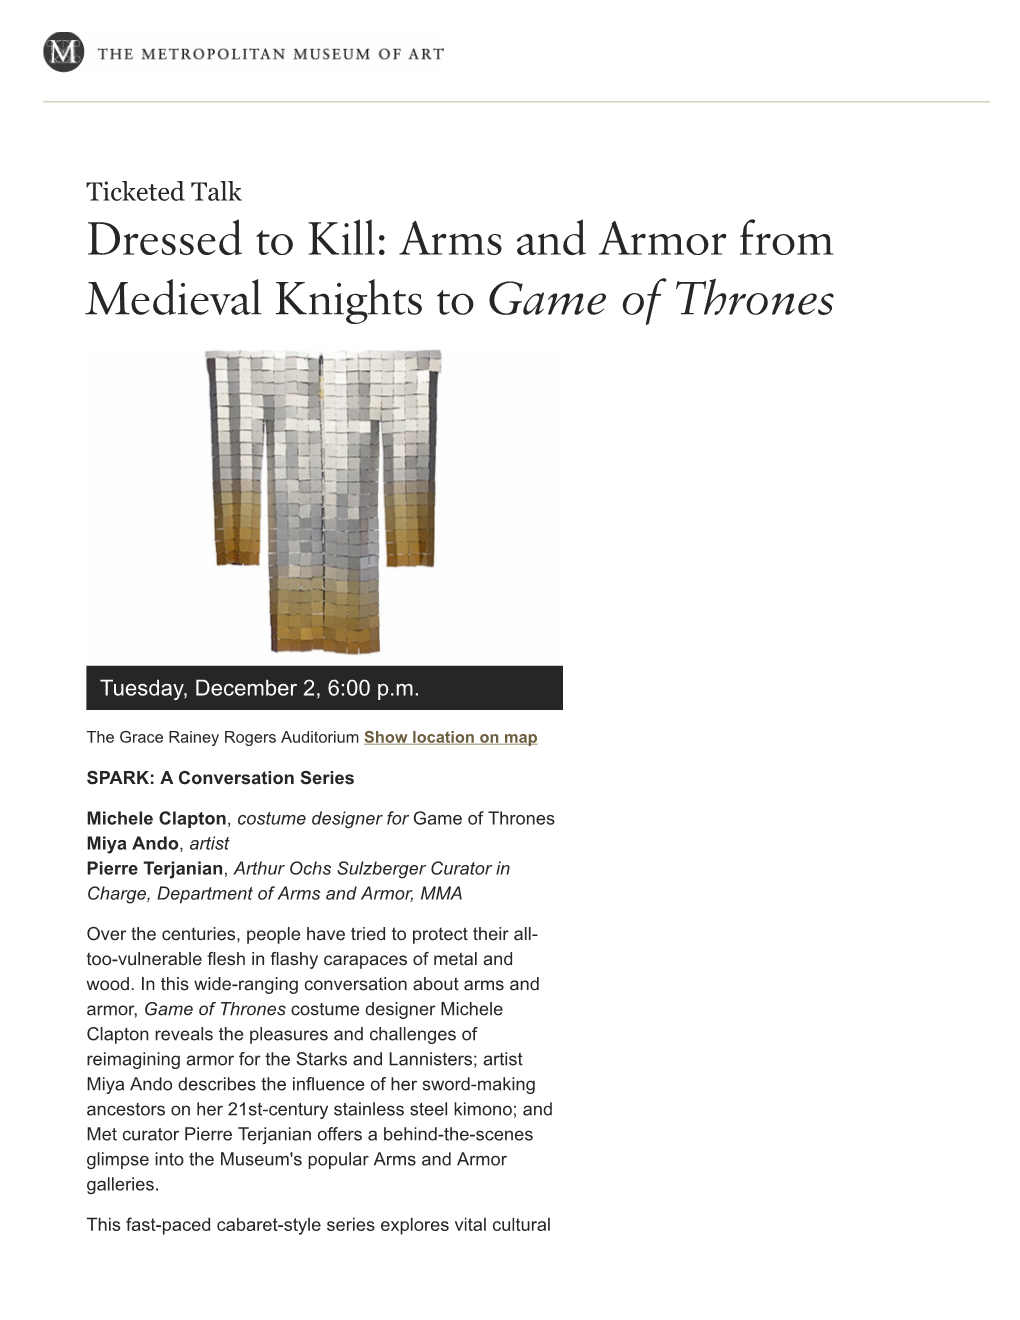 Arms and Armor from Medieval Knights to Game of Thrones